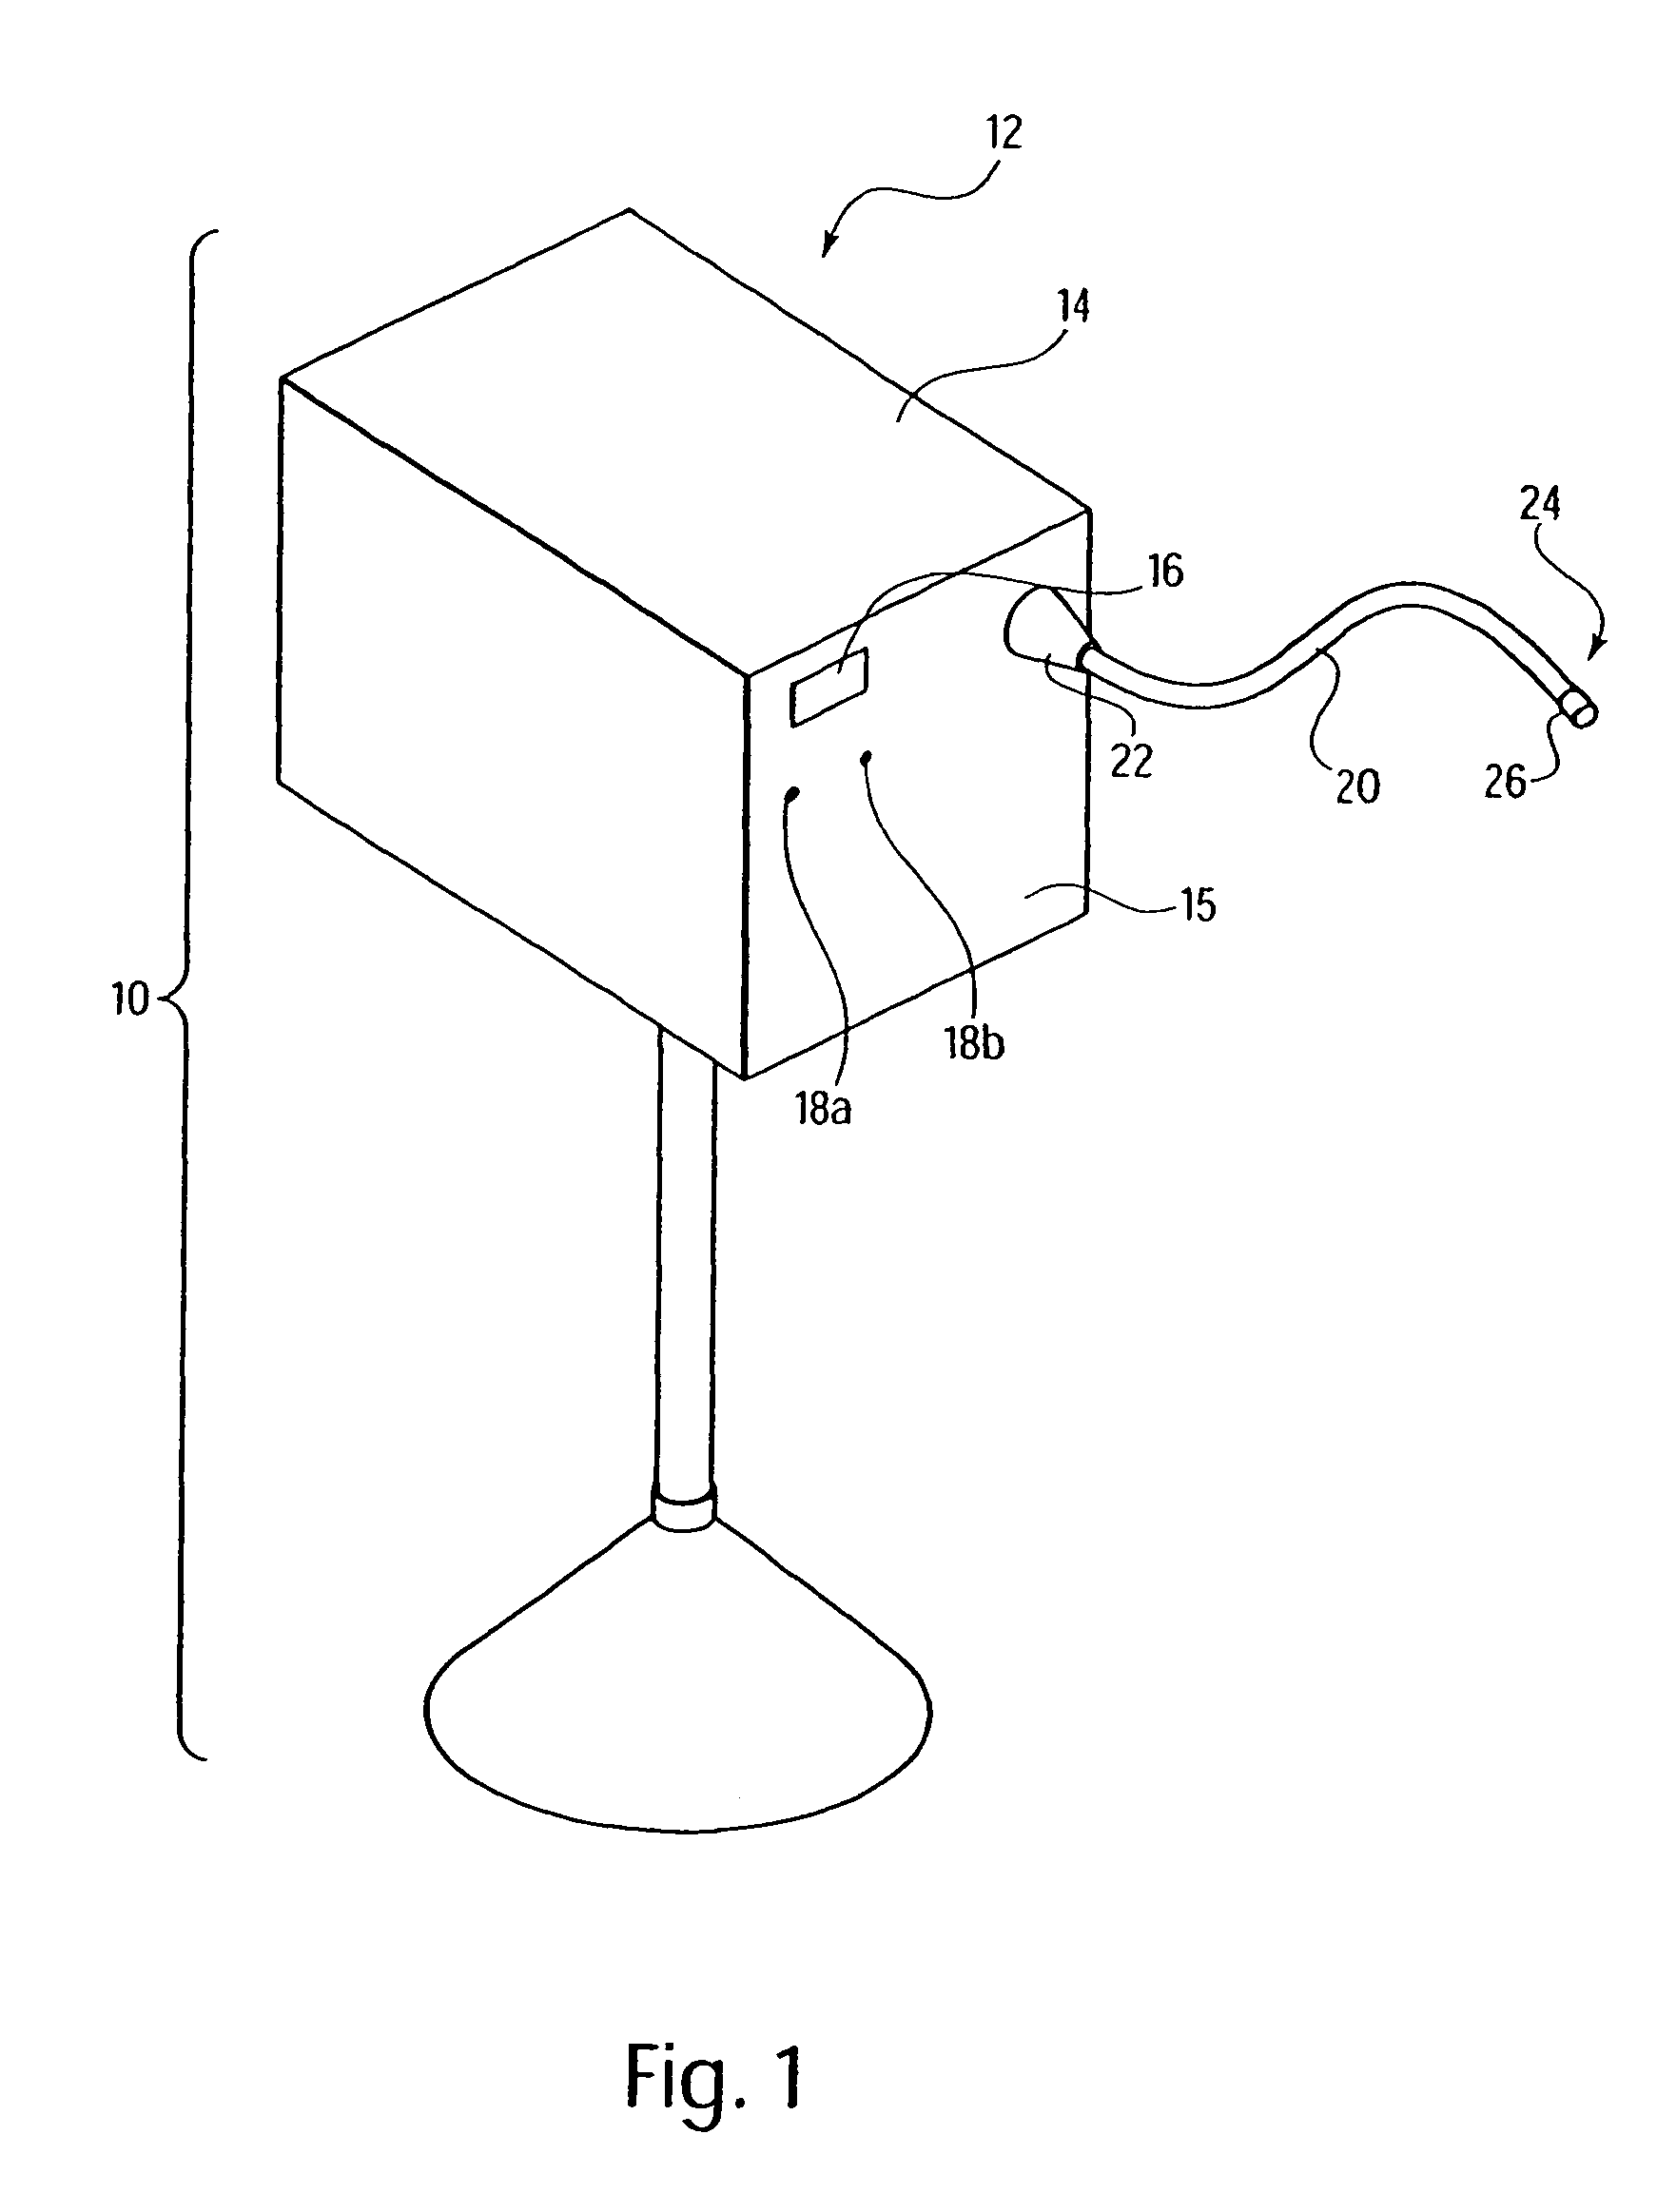 Moisture-detecting shaft for use with an electro-mechanical surgical device